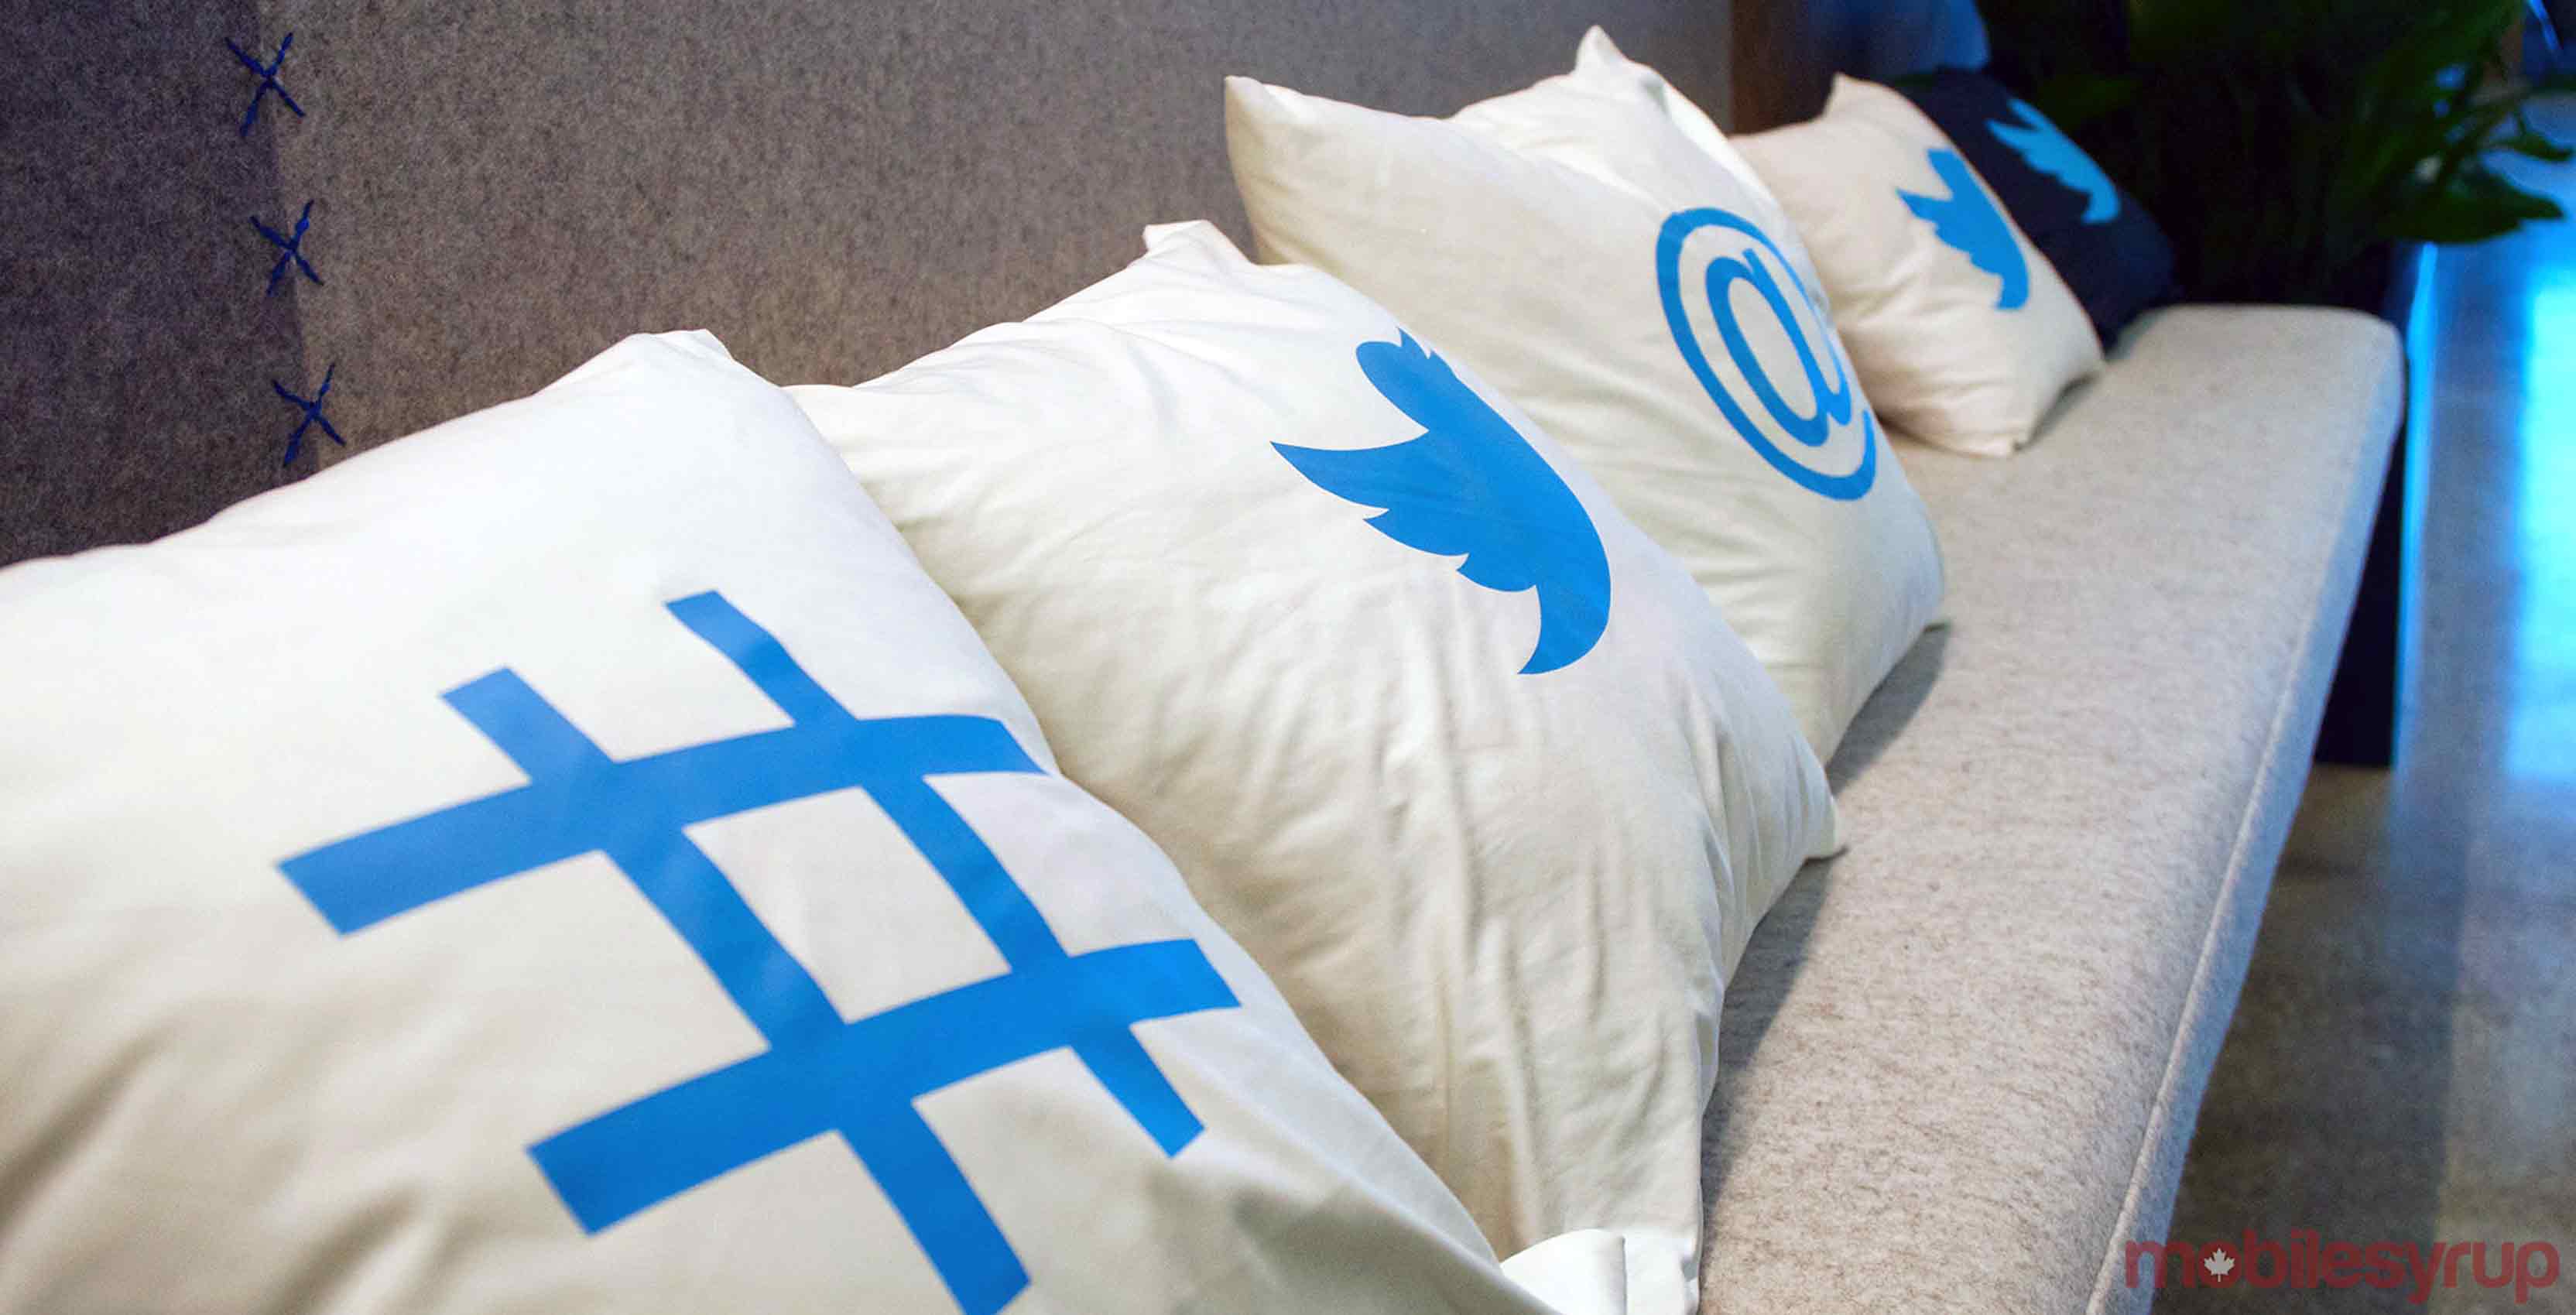 A collection of pillows featuring popular Twitter icons